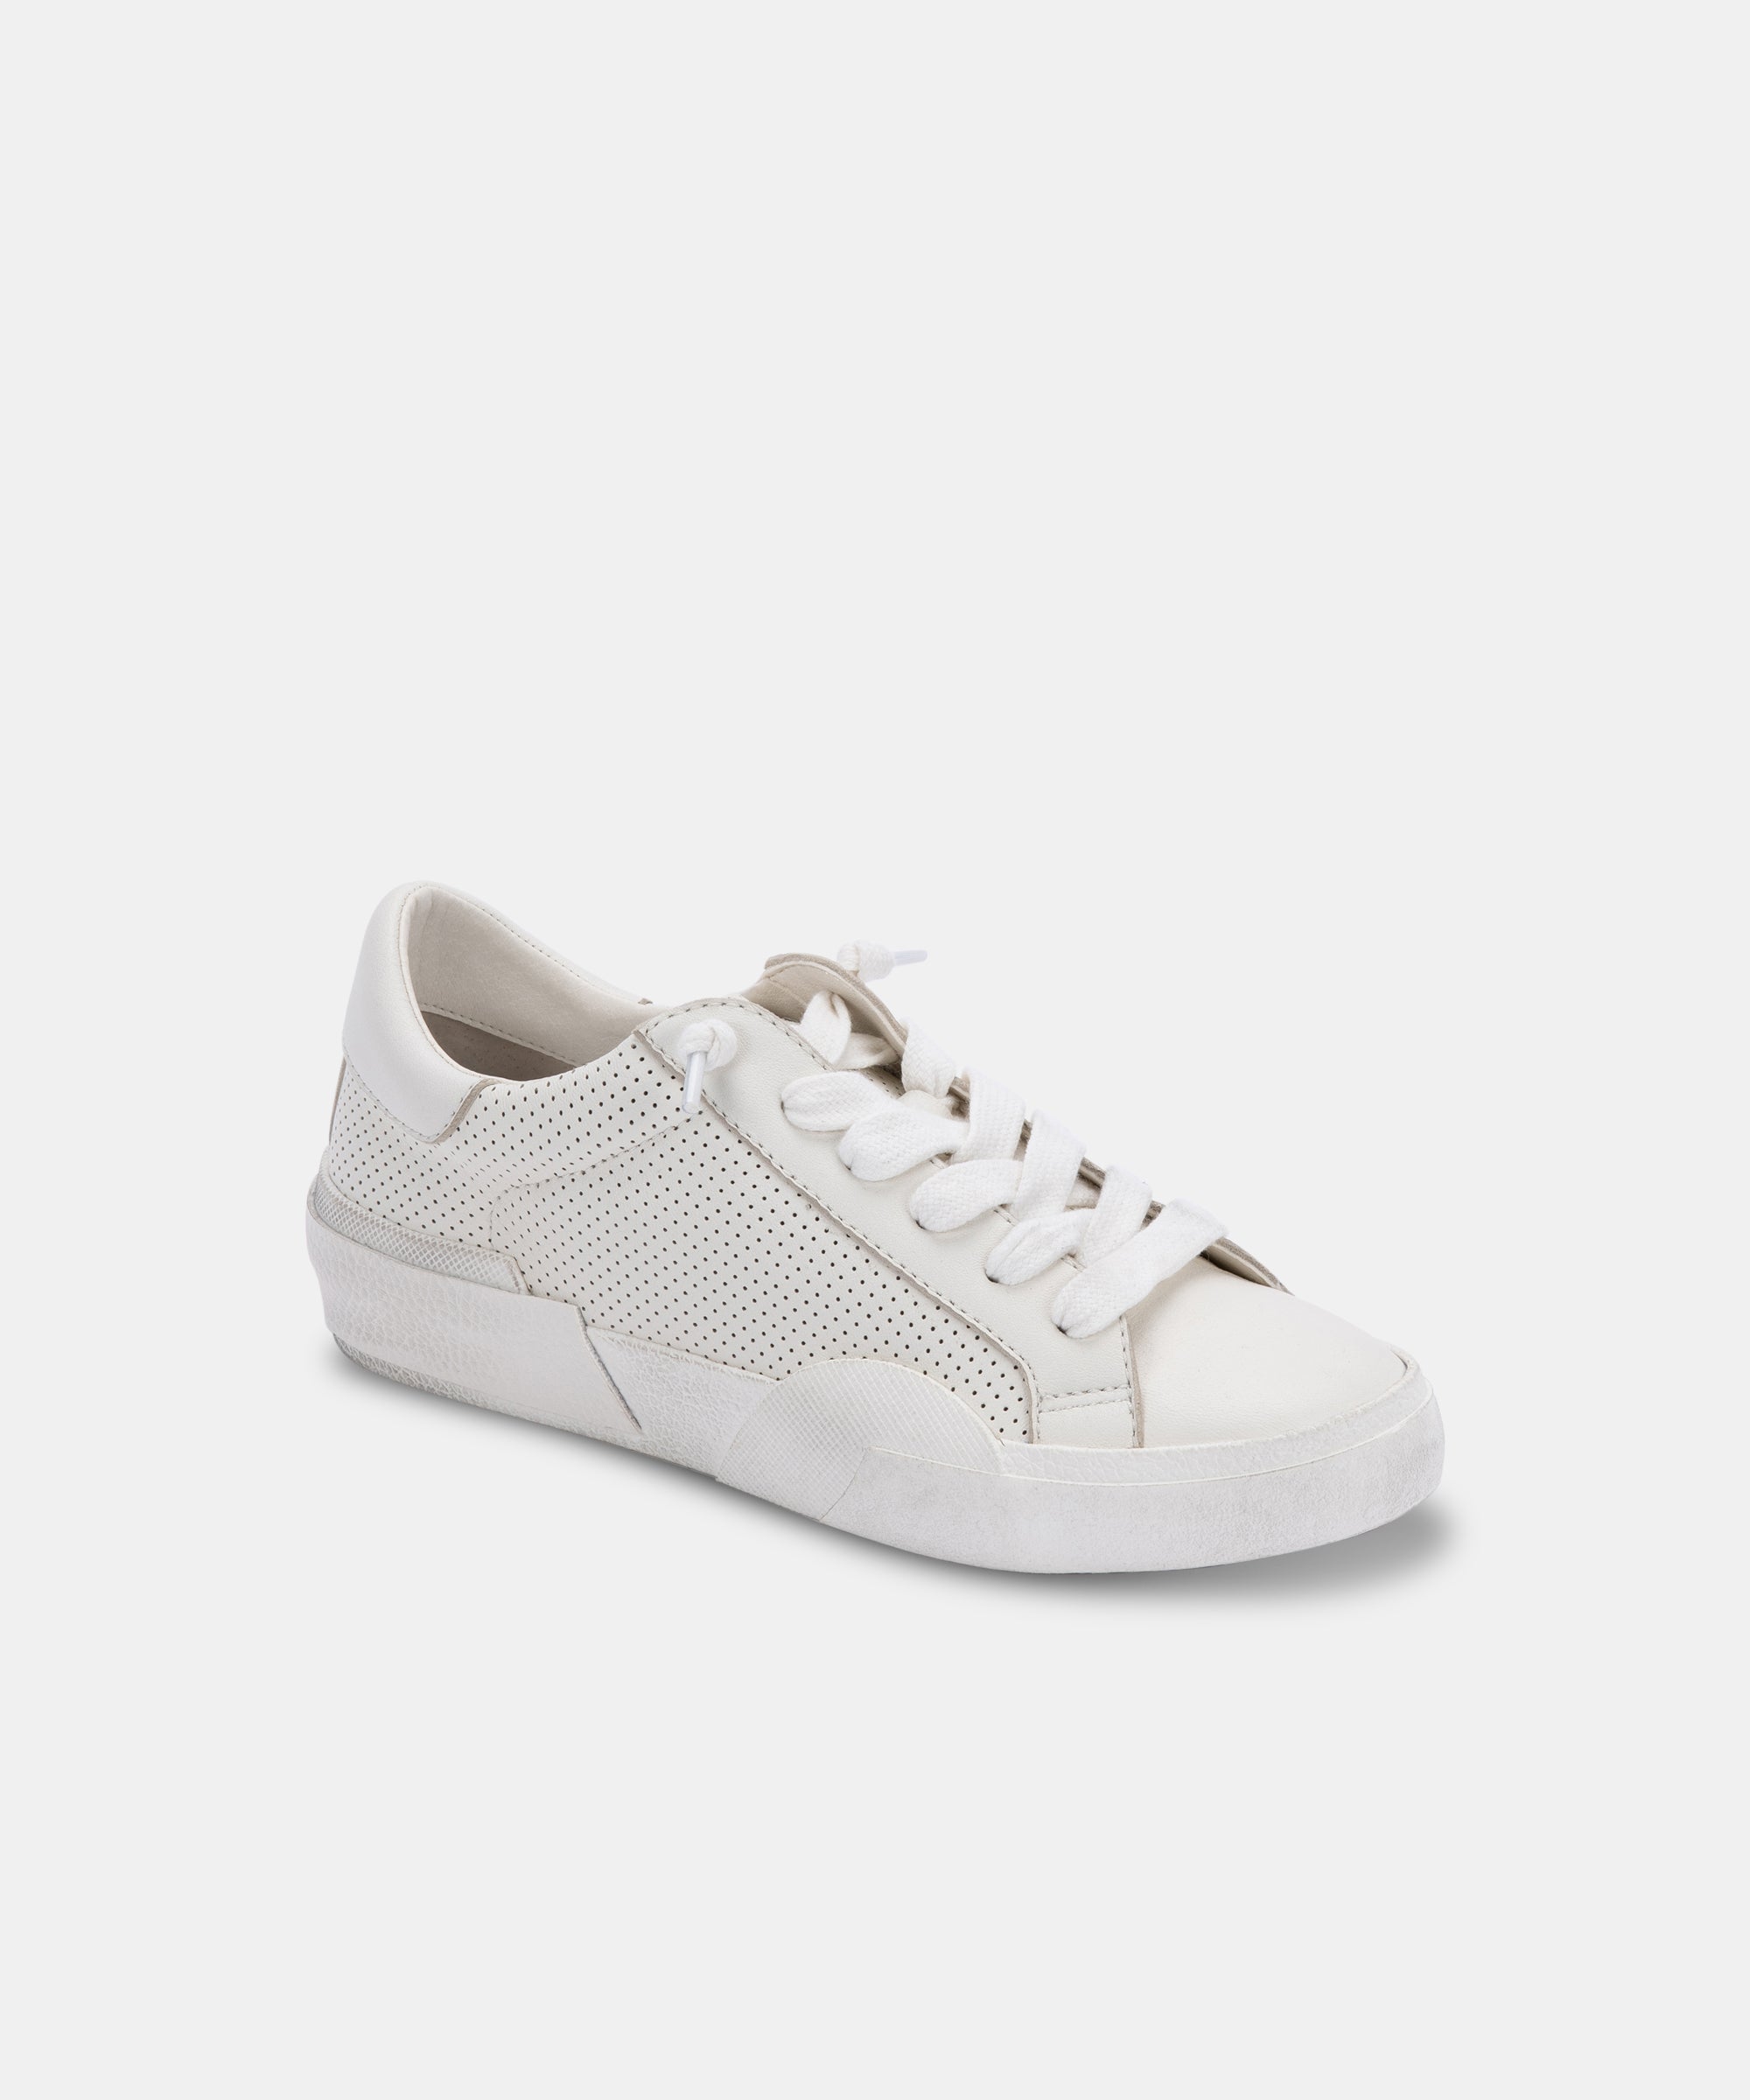 ZINA SNEAKERS WHITE PERFORATED LEATHER – Dolce Vita